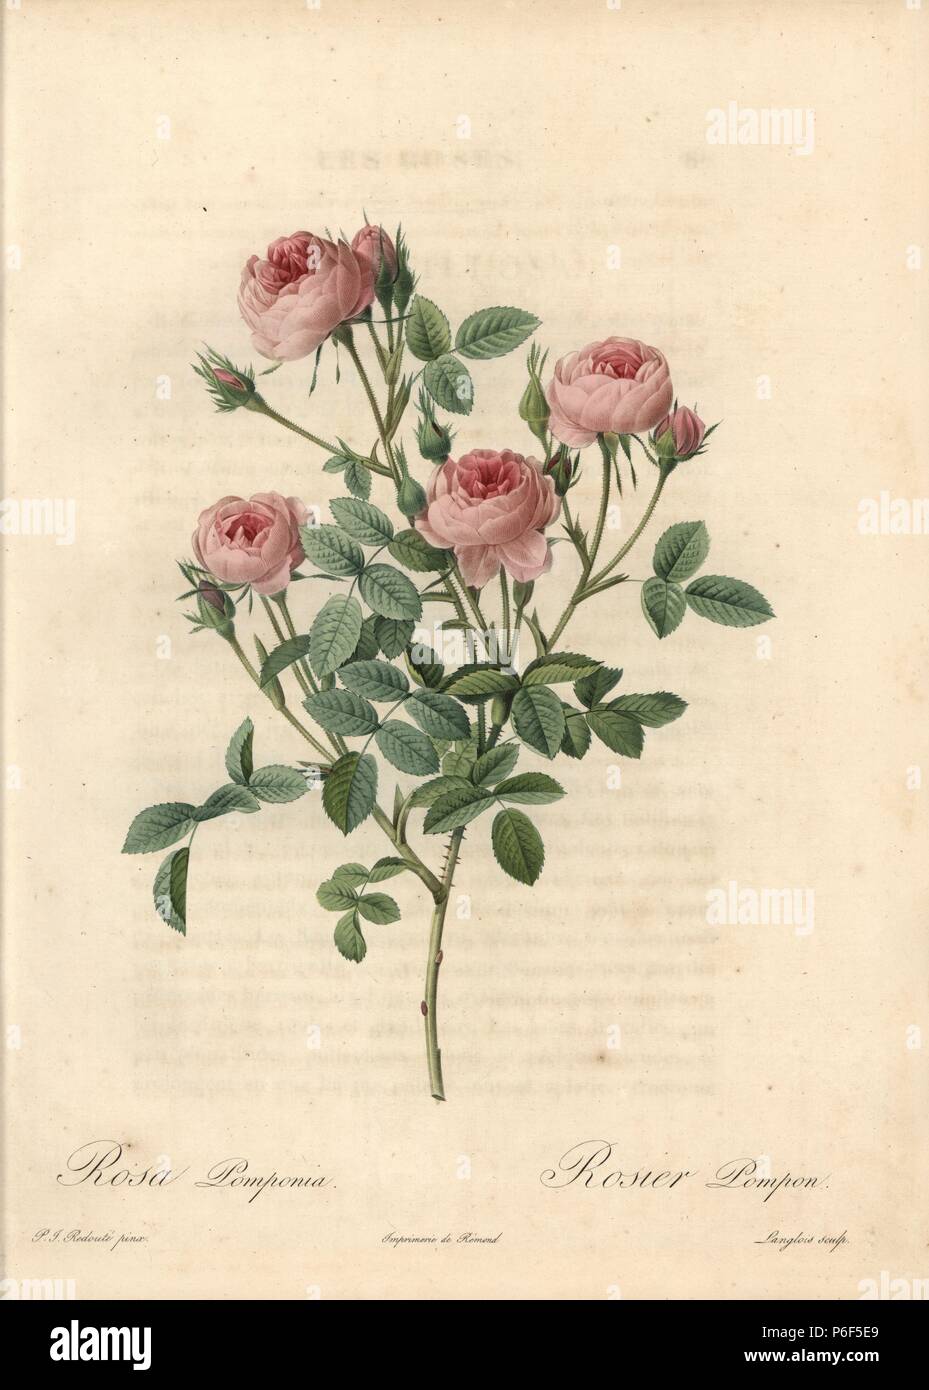 Rose de Meaux rose, Rosa Rose de Meaux (Rosa pomponia). Handcoloured stipple copperplate engraving by Langlois after an illustration by Pierre-Joseph Redoute from "Les Roses," Firmin Didot, Paris, 1817 Stock Photo -